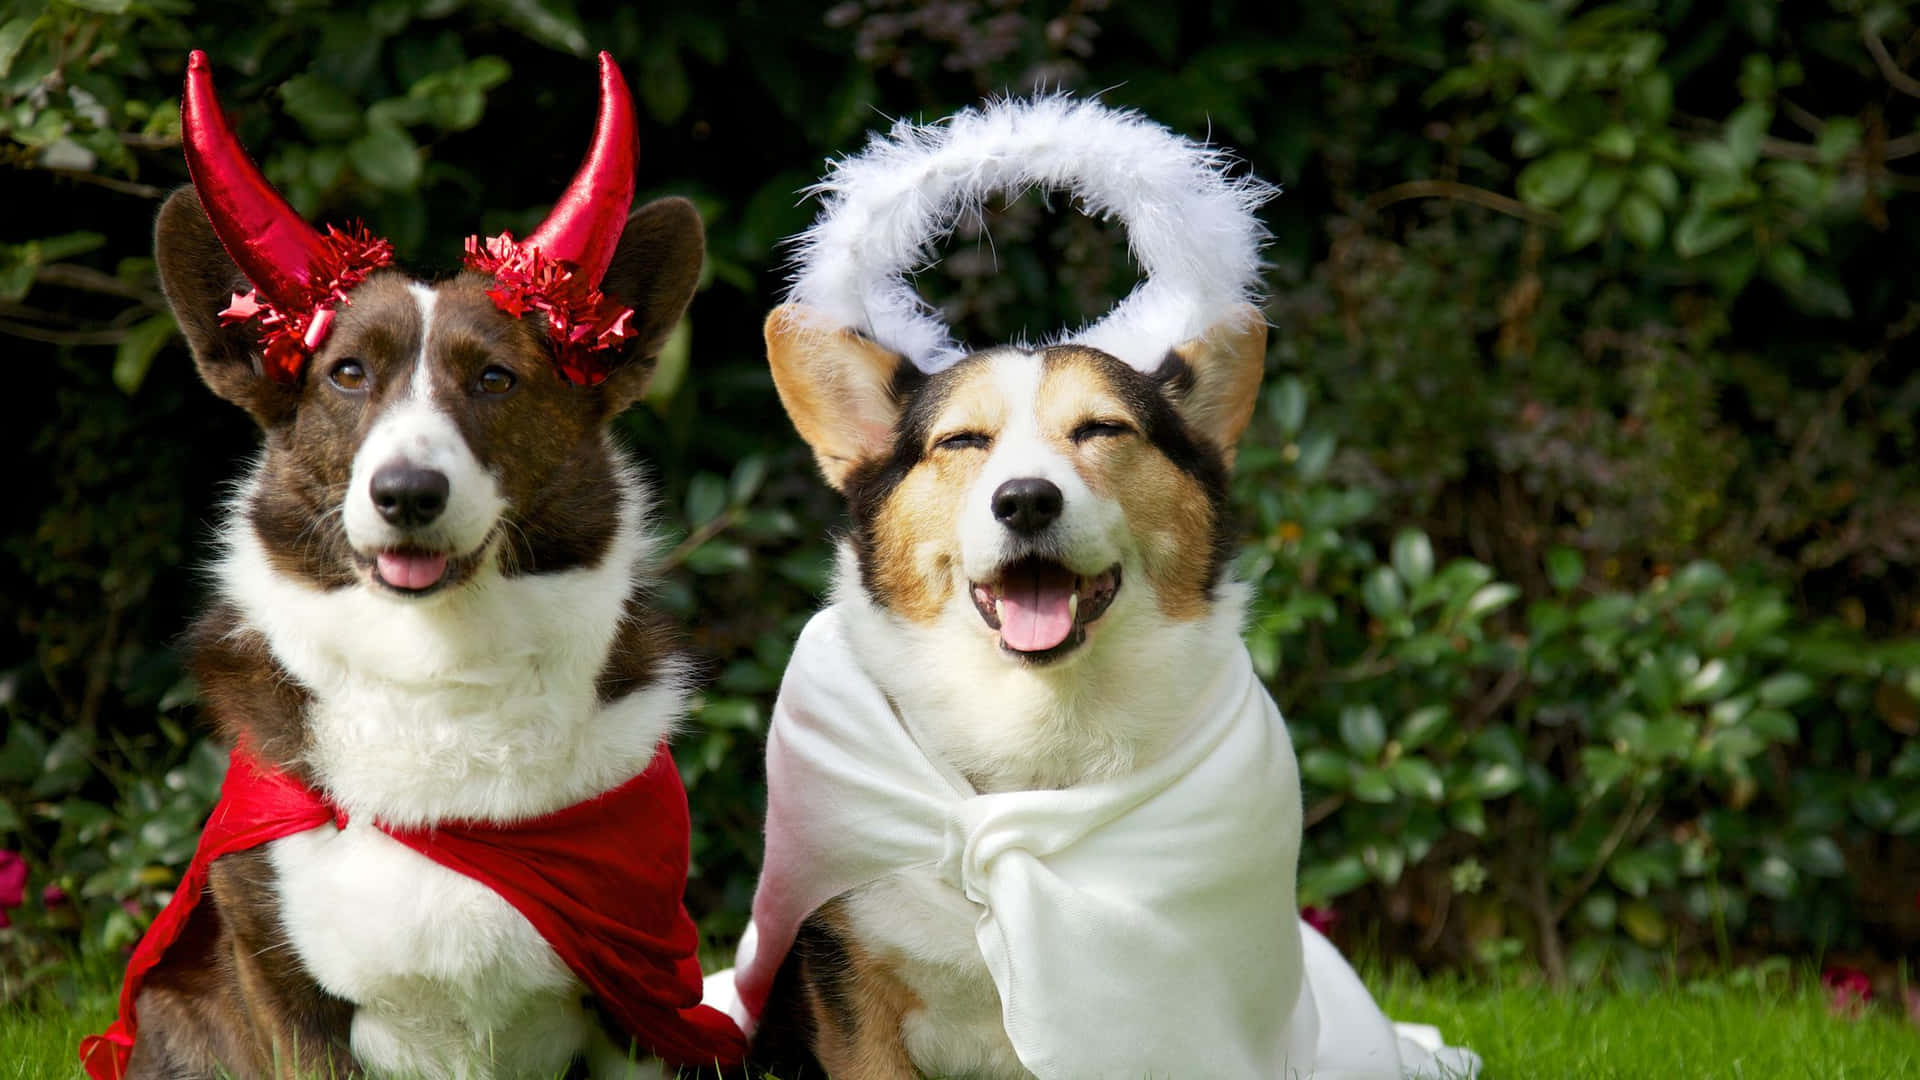 Dress Your Pet Up for Halloween in Stylish Costumes! Wallpaper